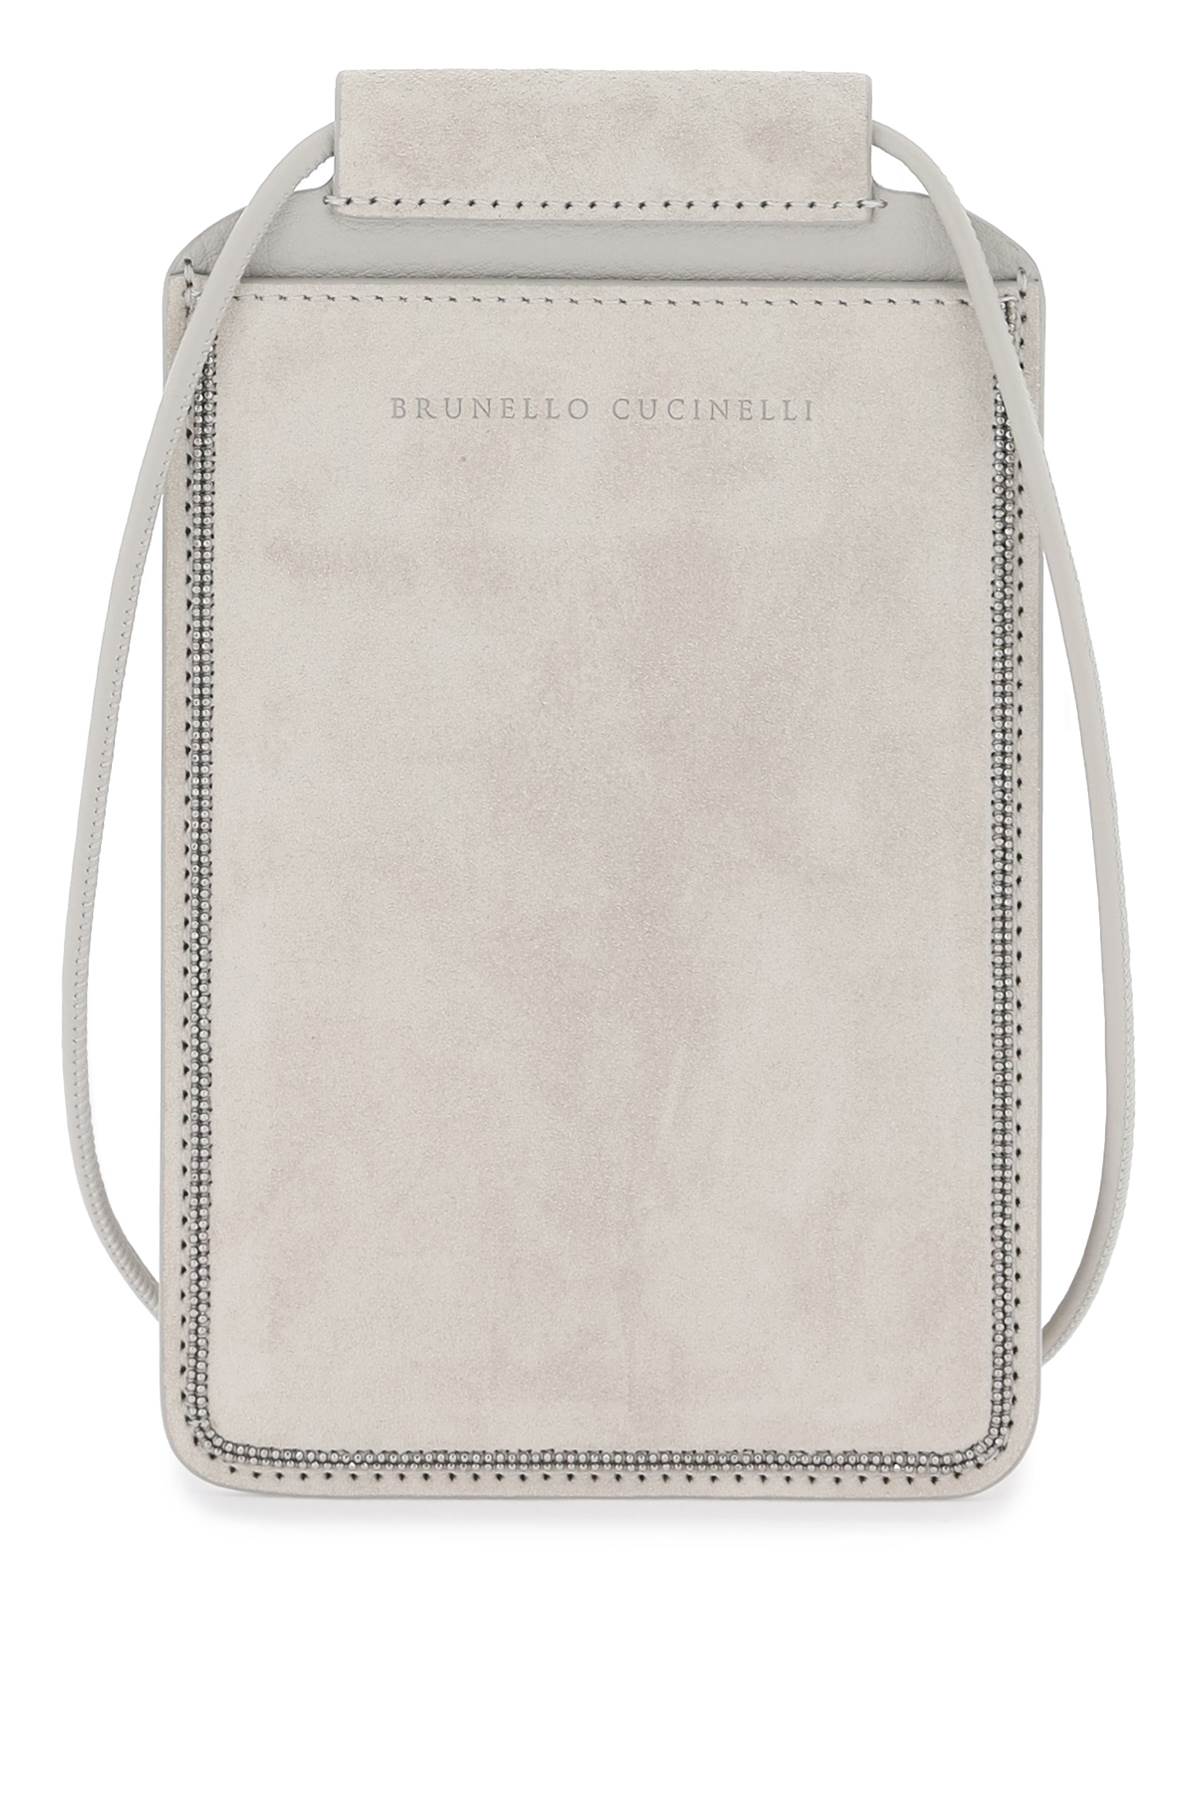 BRUNELLO CUCINELLI Tan Suede Phone Cover with Adjustable Strap for Women - SS24 Collection